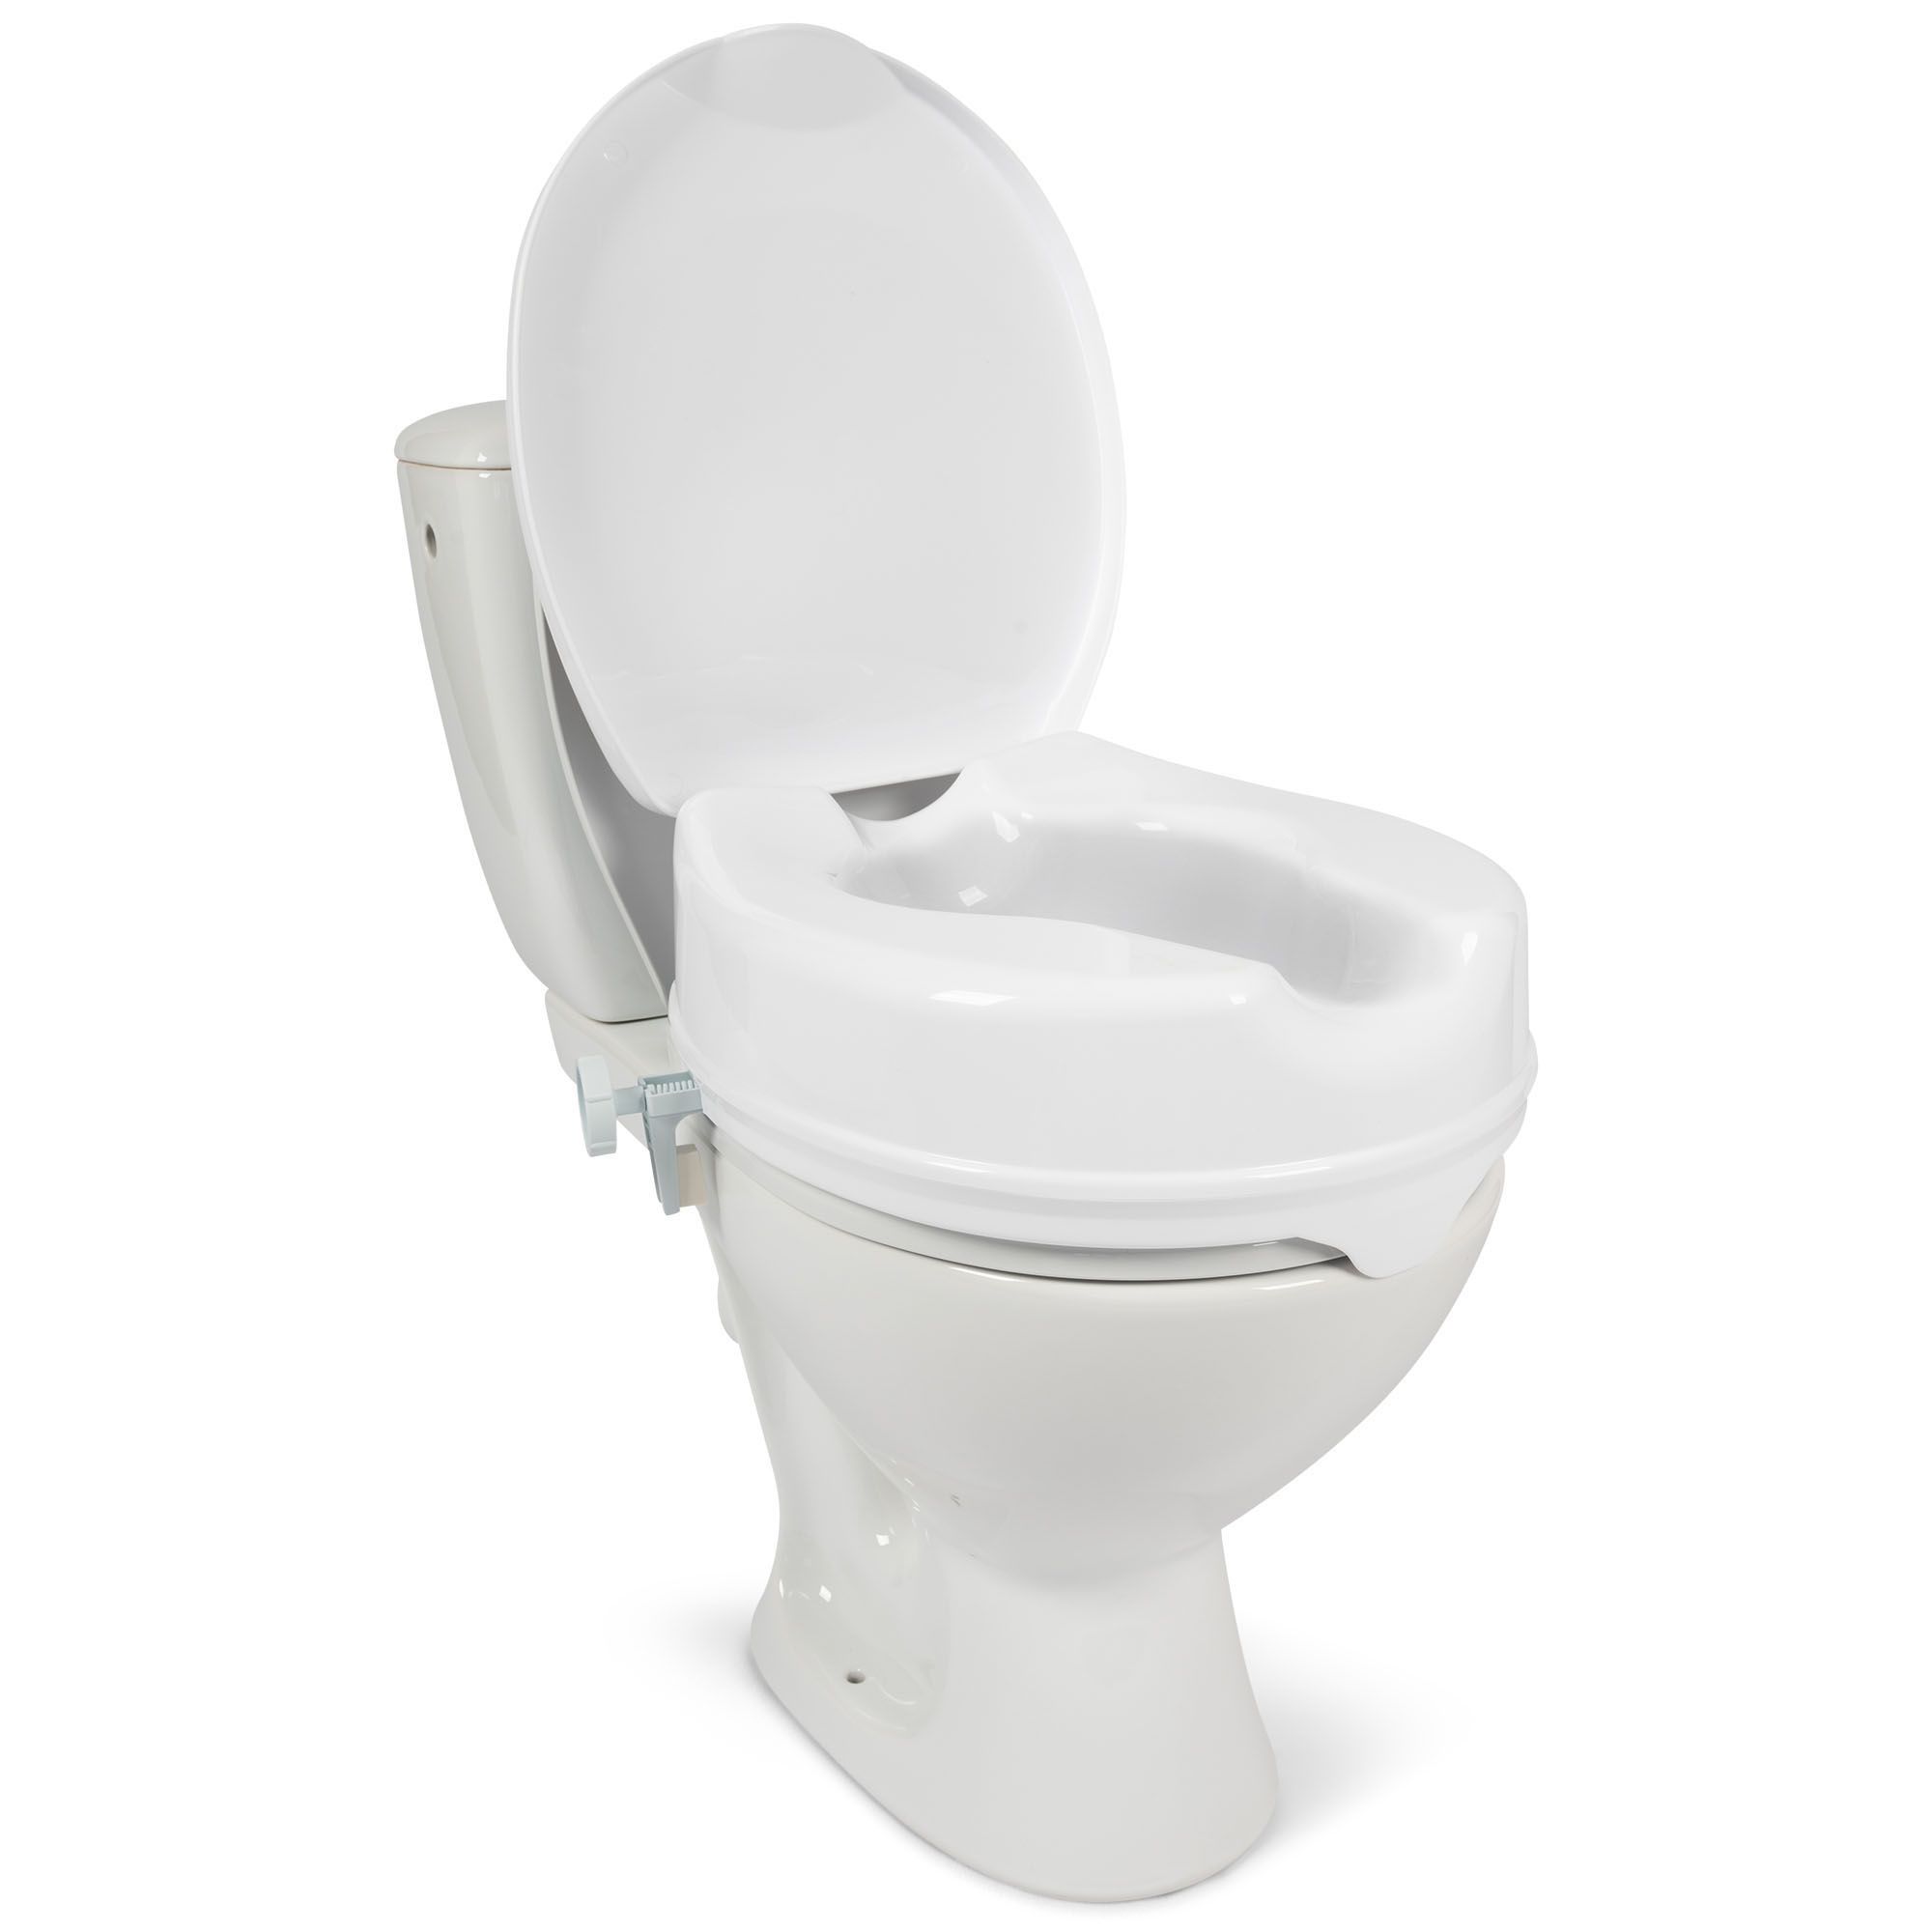 dunimed raised toilet seat for sale